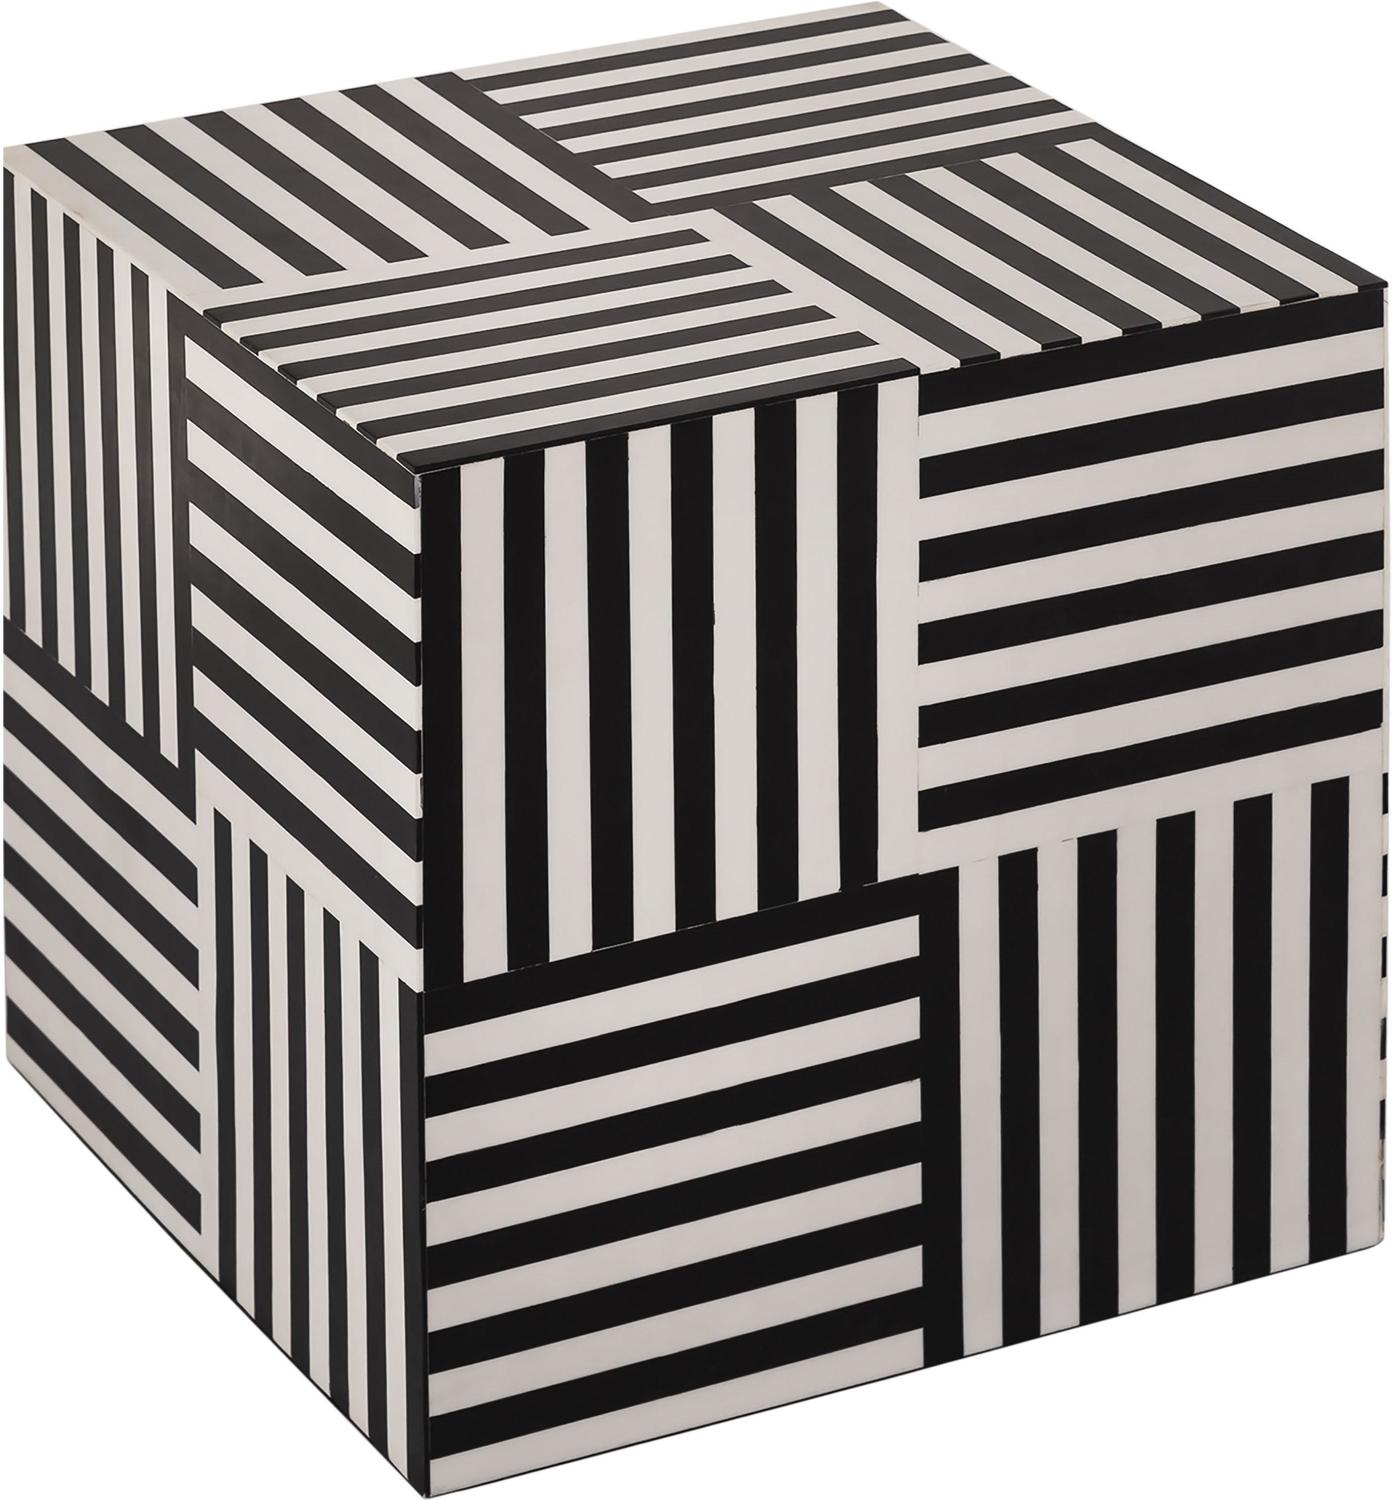 Tov Furniture Side Tables Accent Tables Black and White